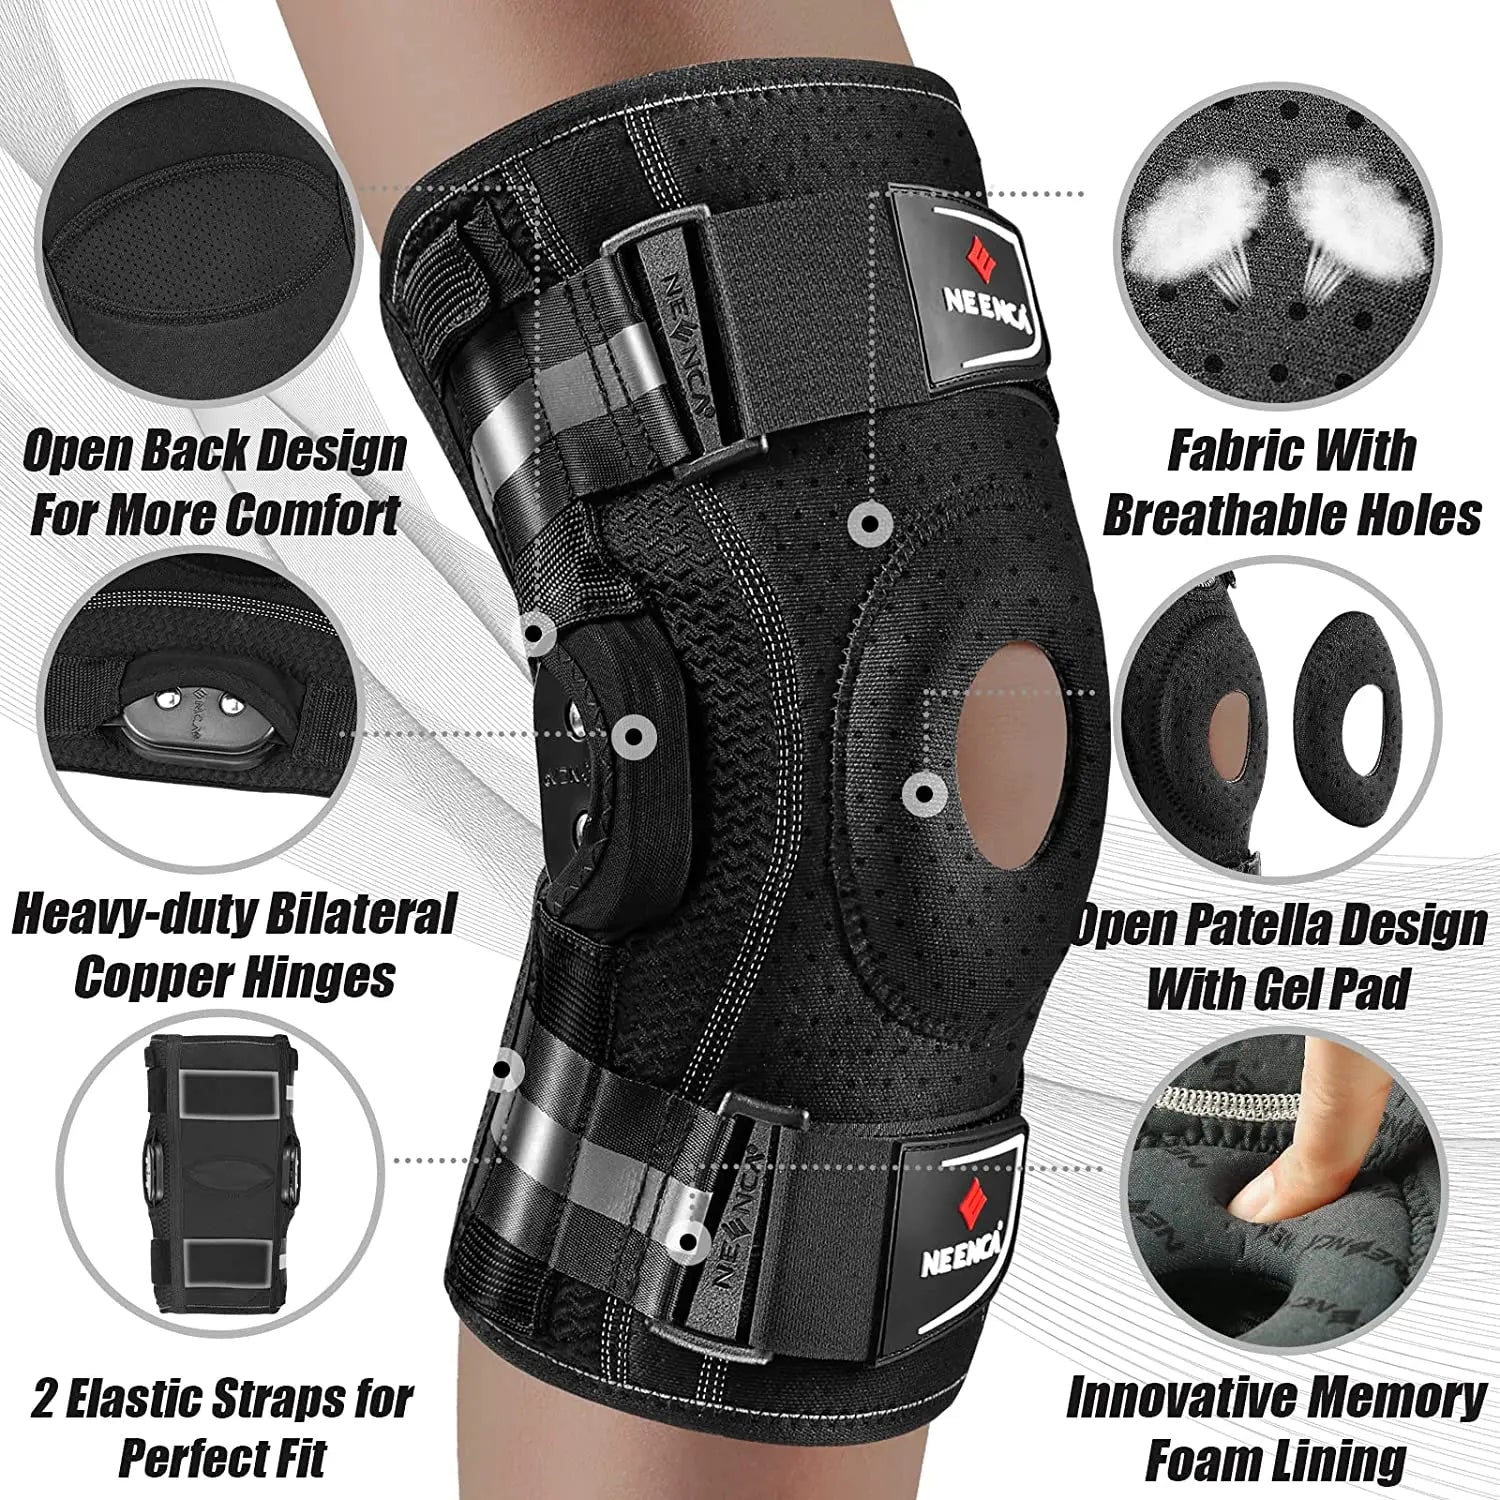 Hinged Knee Brace for Pain Relief and Injury Recovery